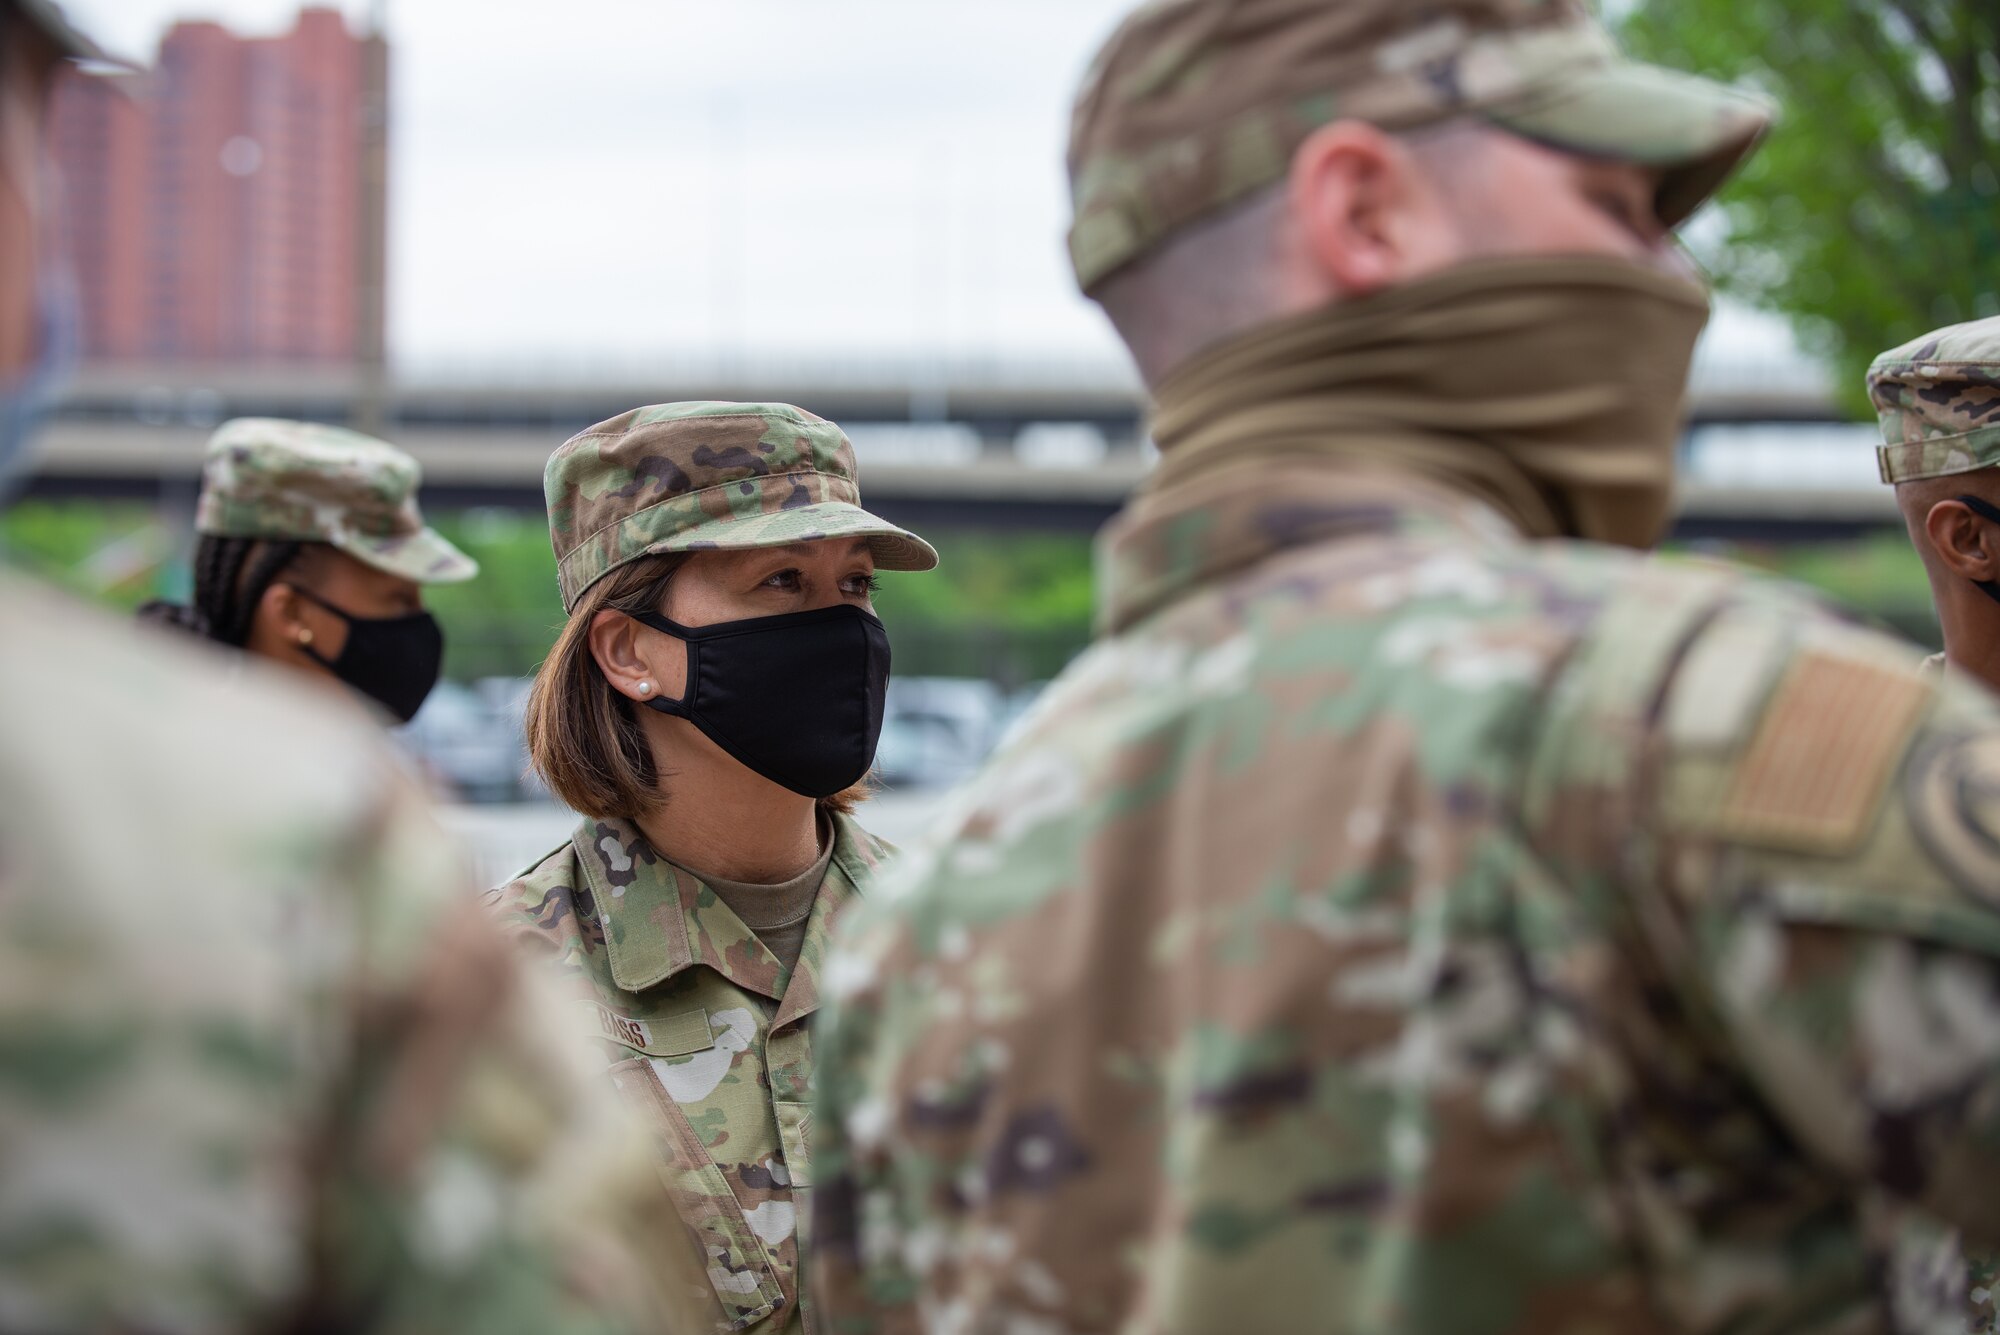 Chief Master Sgt. of the Air Force JoAnne S. Bass visits Airmen of the 175th Wing, Maryland National Guard, at the mass vaccination site at M&T Bank Stadium, Baltimore, on May 3, 2021.